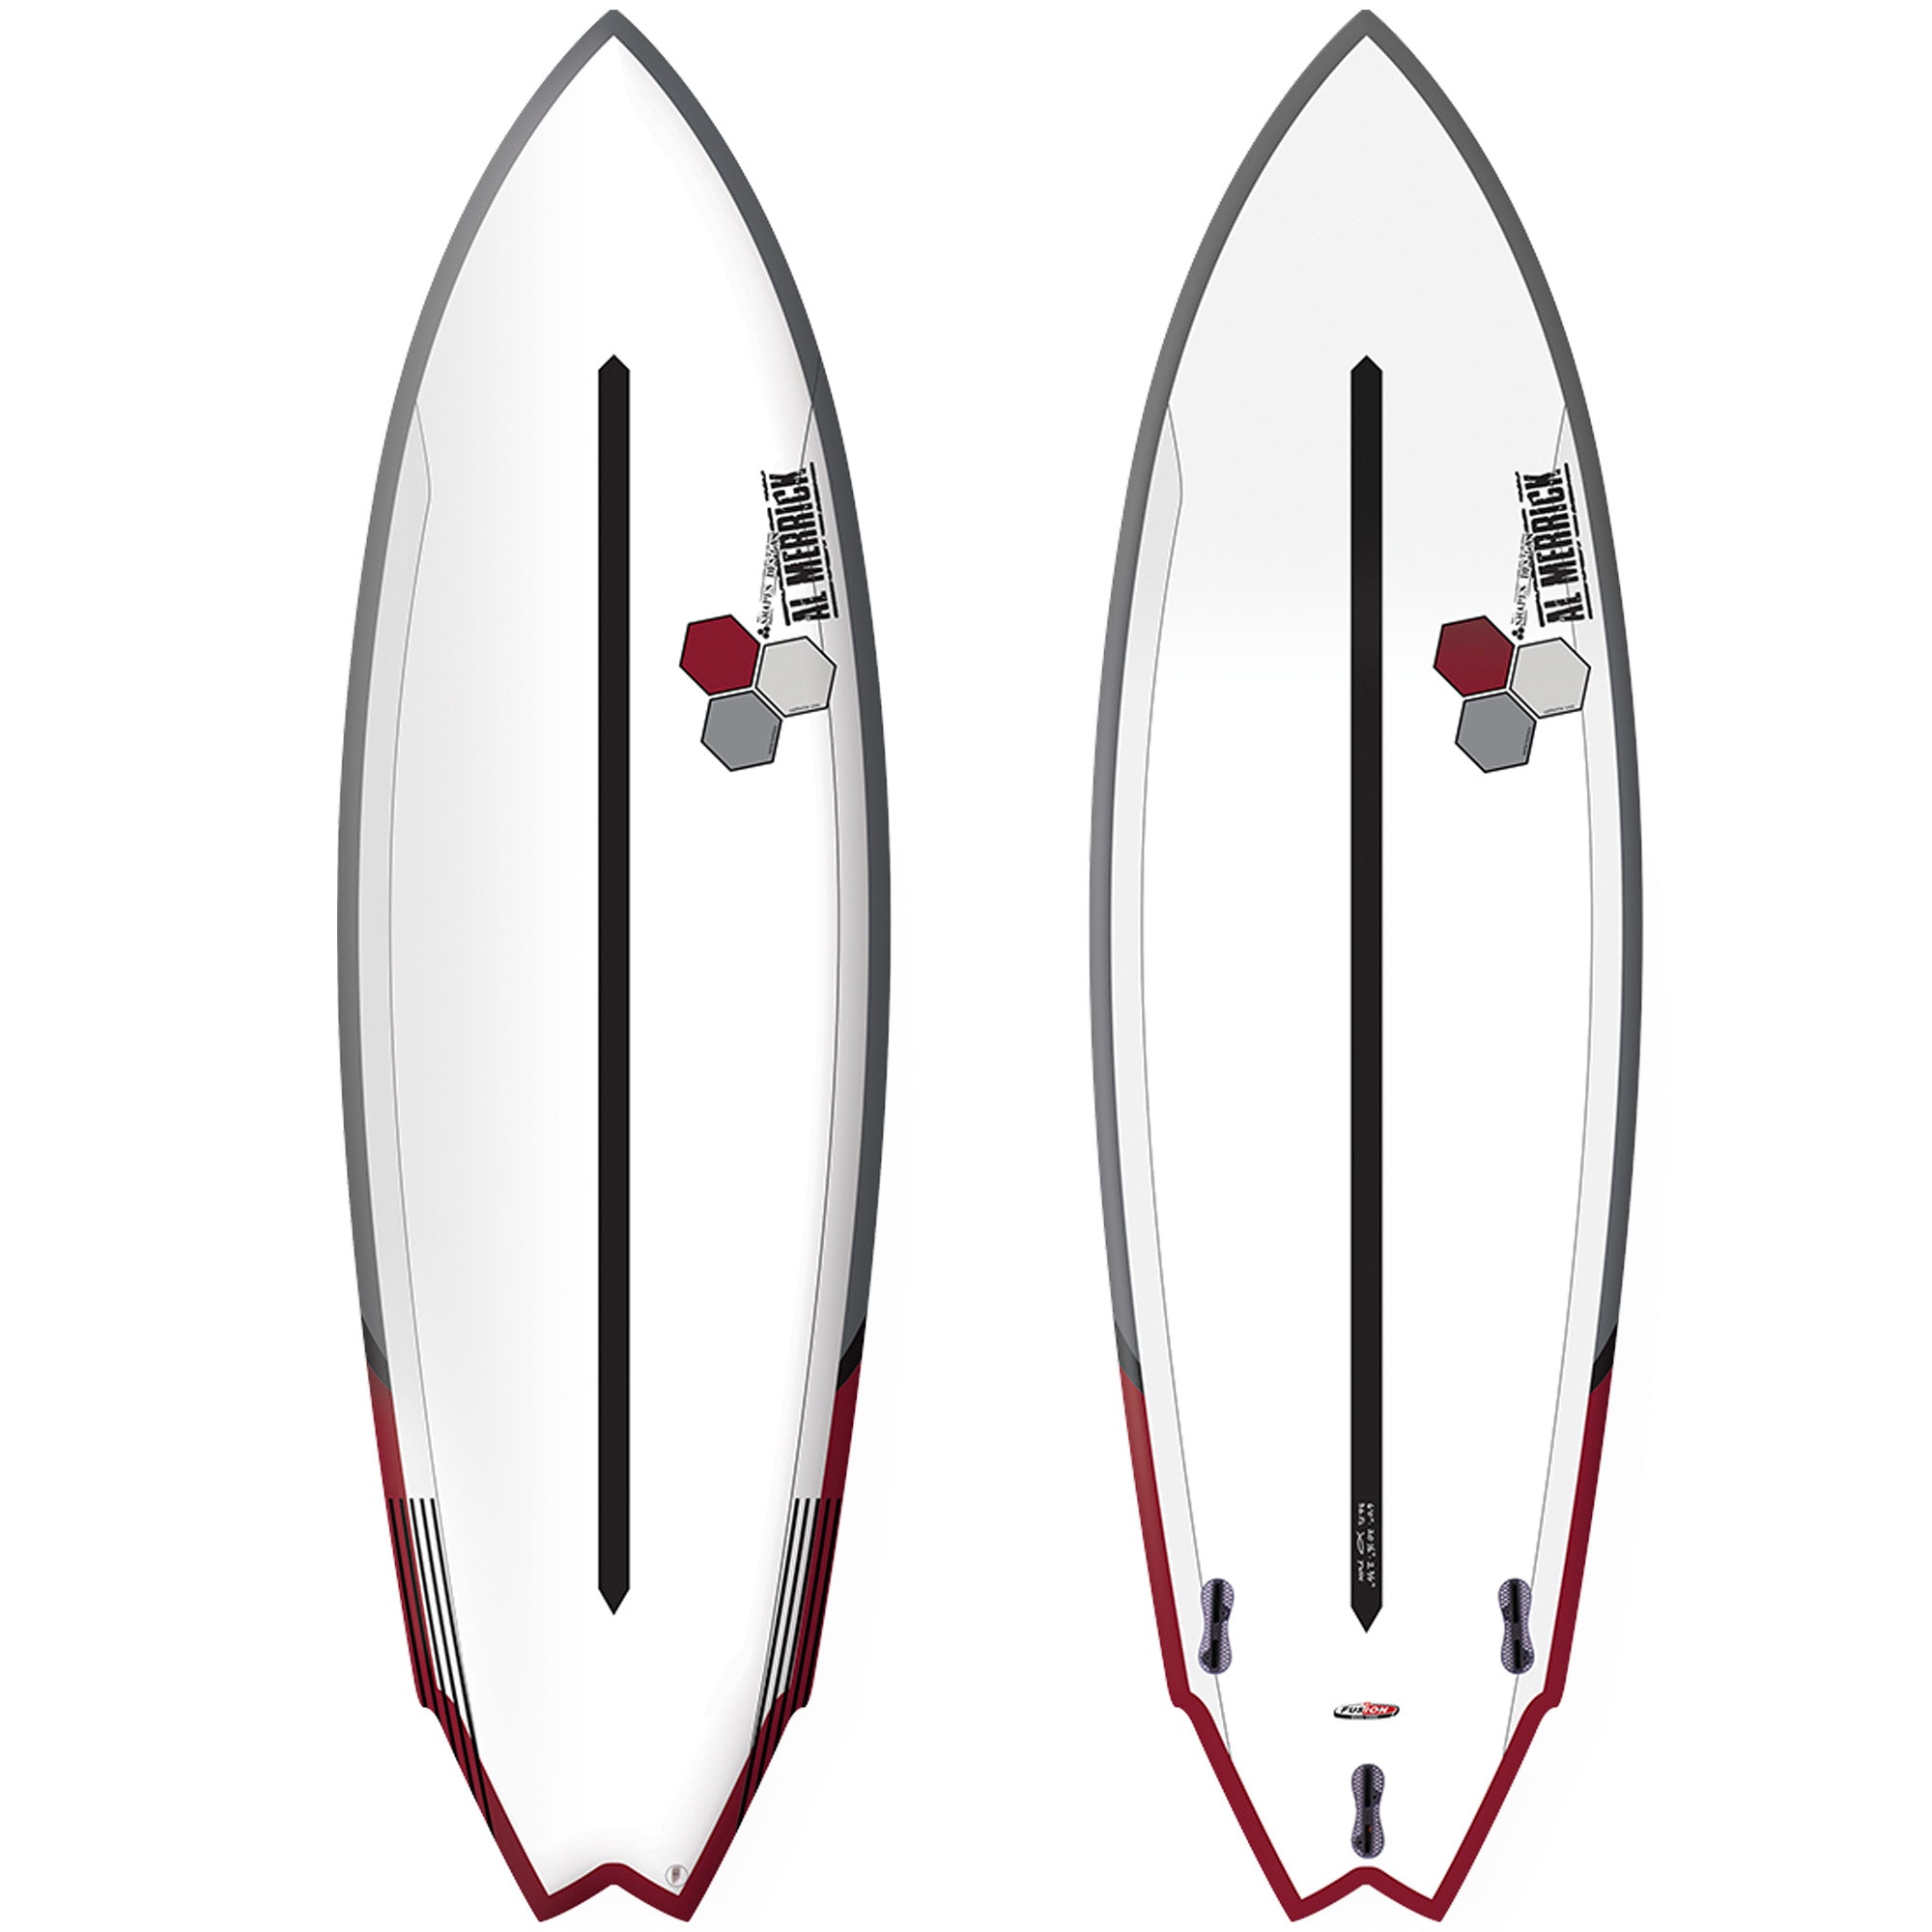 Channel Islands Twin Fin Fusion Dual Core Surfboard   The Surf